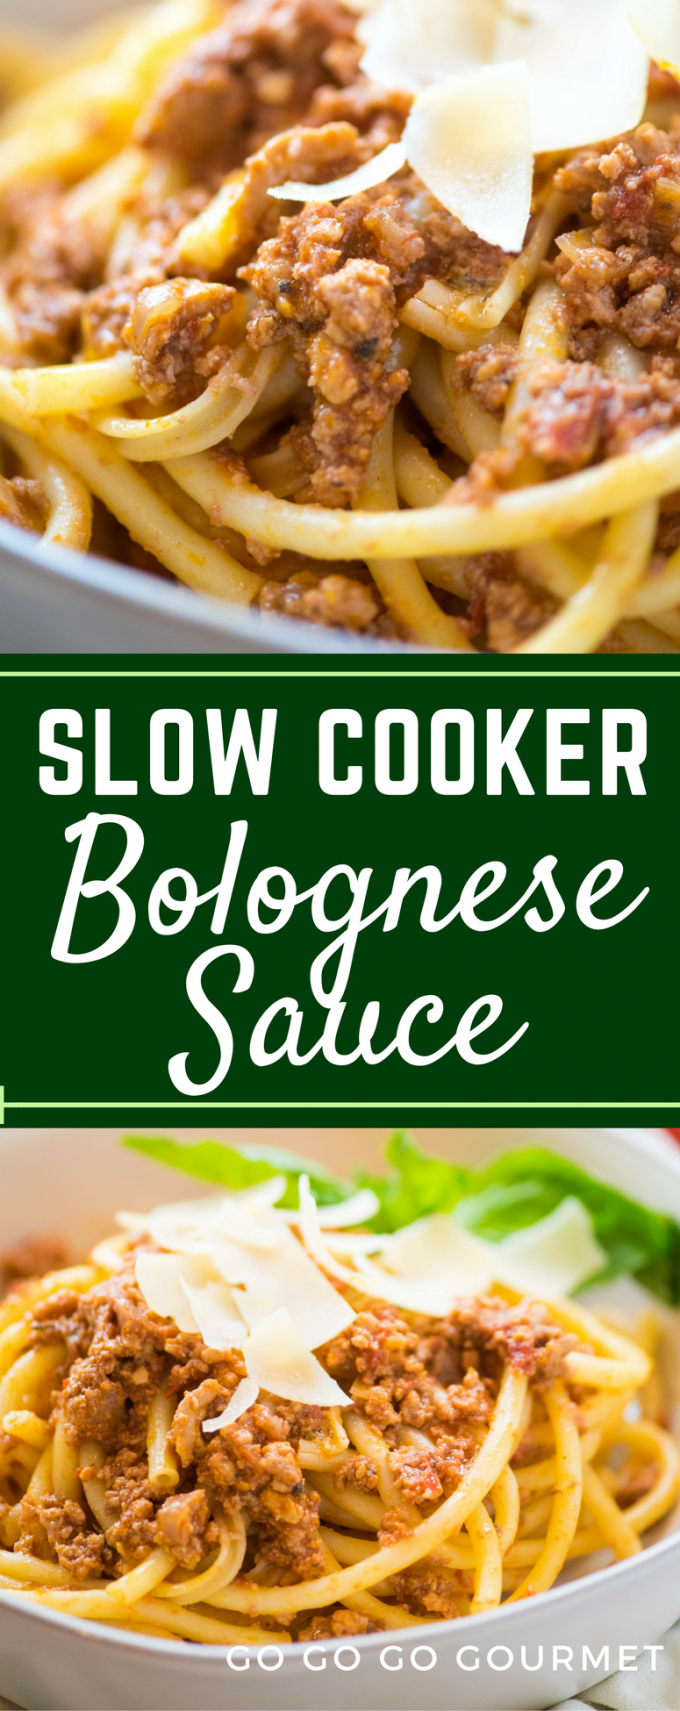 BEST EVER! This Slow Cooker Bolognese cooks all day long in the crockpot. Hearty and rich, it's full of incredible classic authentic Italian flavors, and coats every strand of pasta perfectly. #gogogogourmet #slowcookerbolognese #bolognesesauce #homemadepastasauce via @gogogogourmet